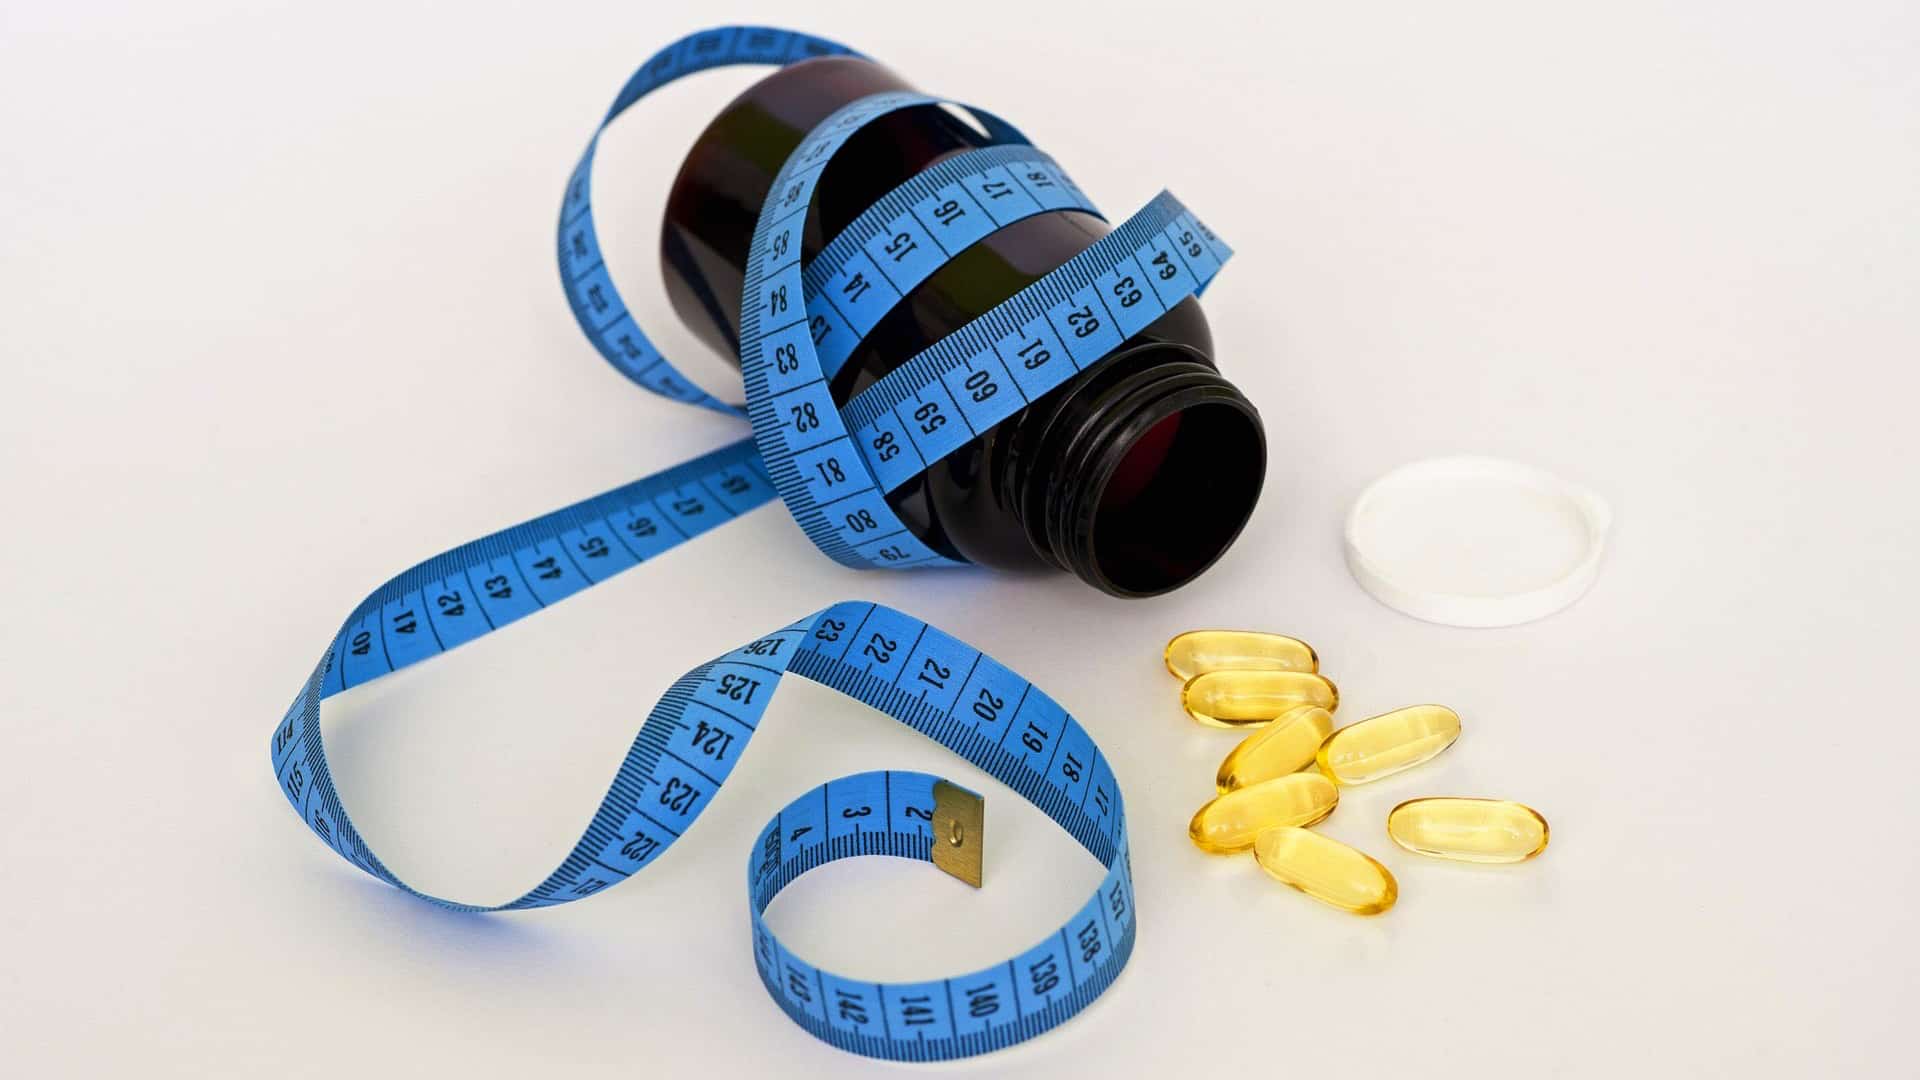 Do Vitamin D Supplements Help with Diabetes, Weight Loss, and Blood Pressure?